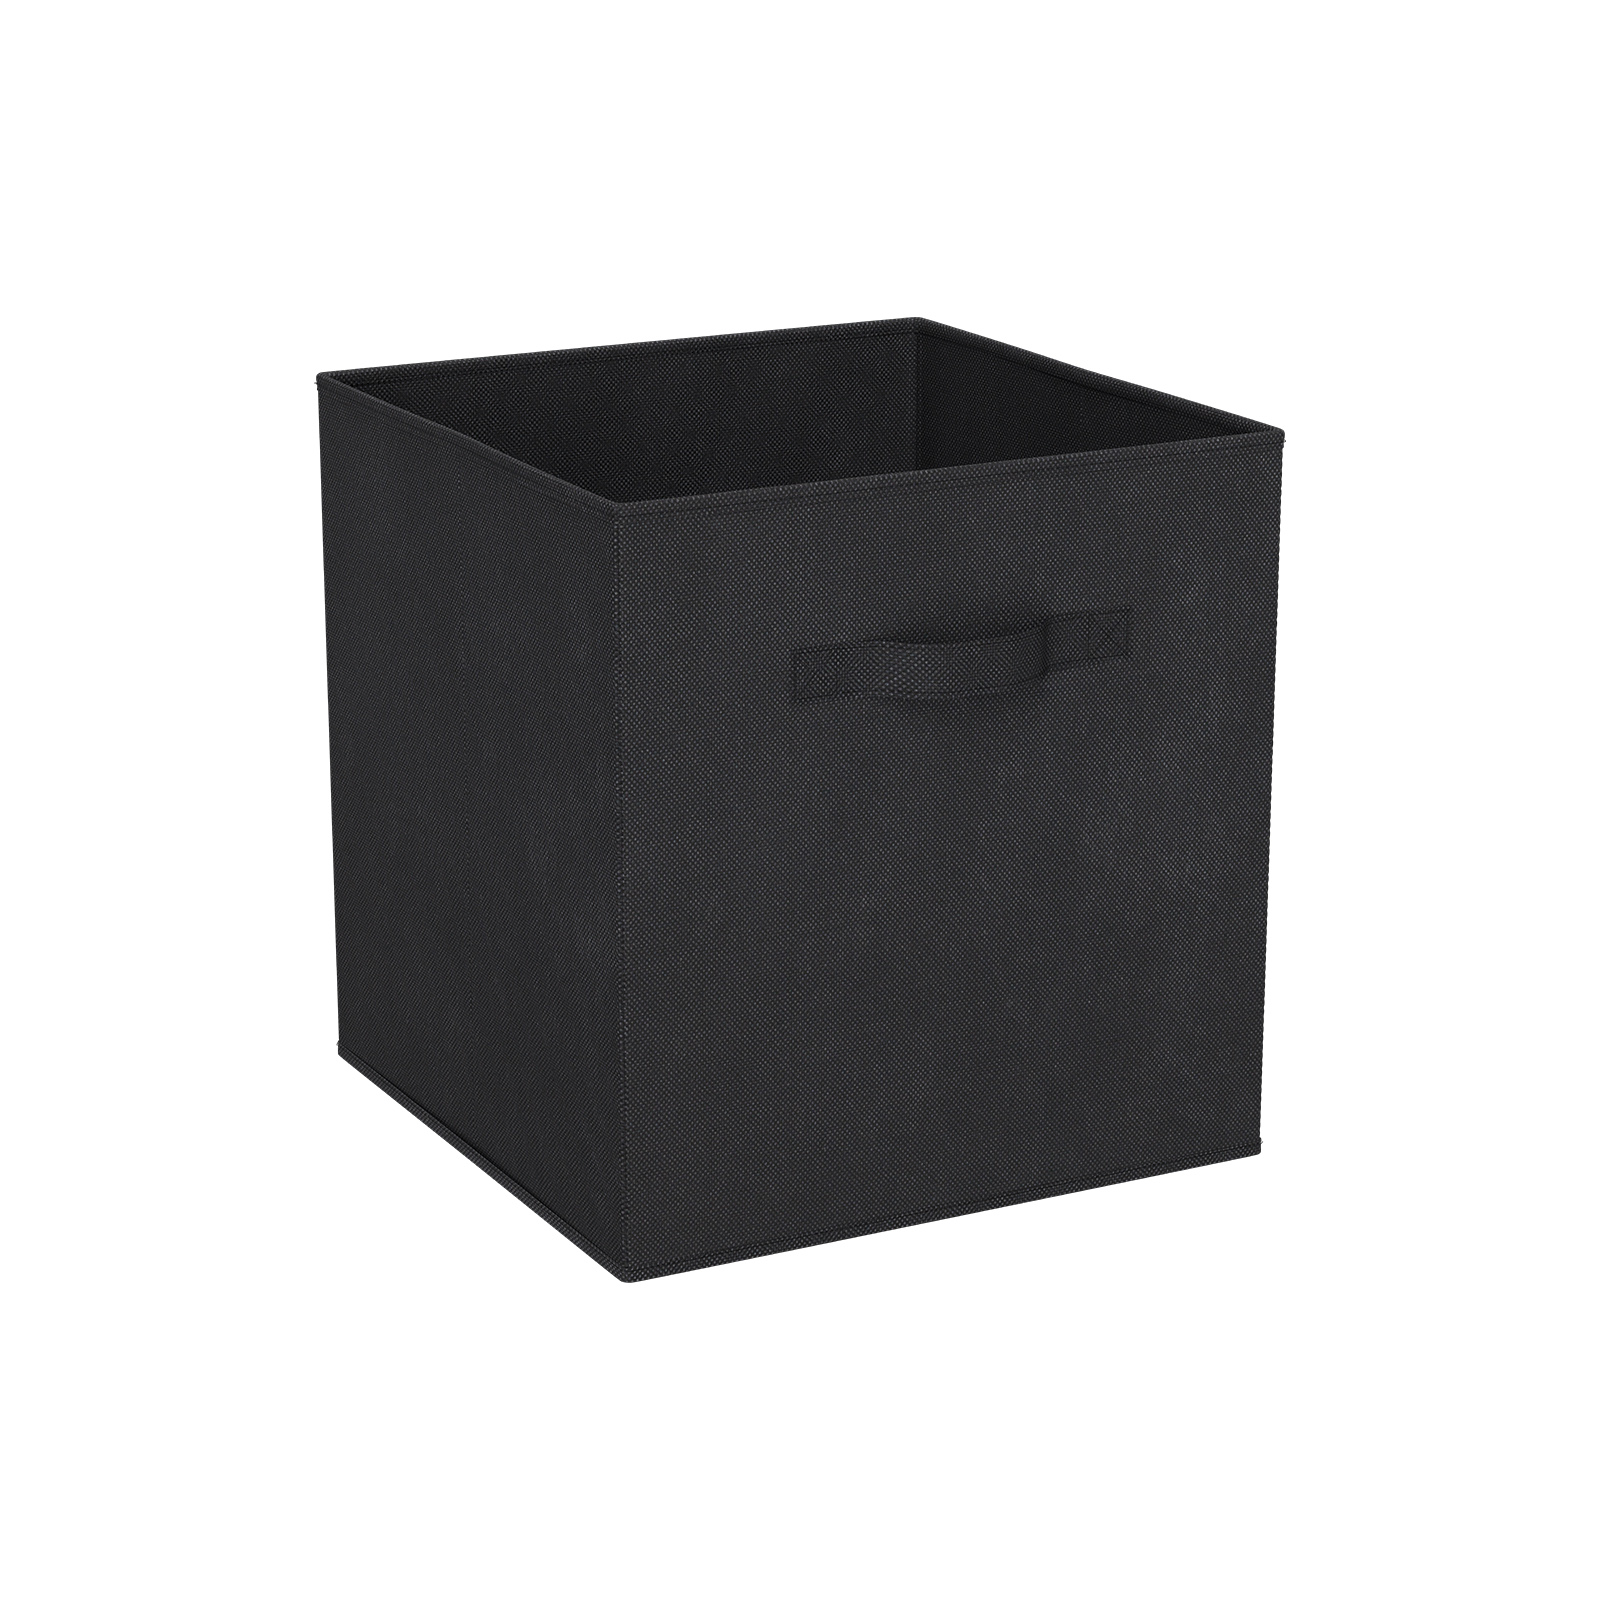 Clever Cube Compact Fabric Insert Black